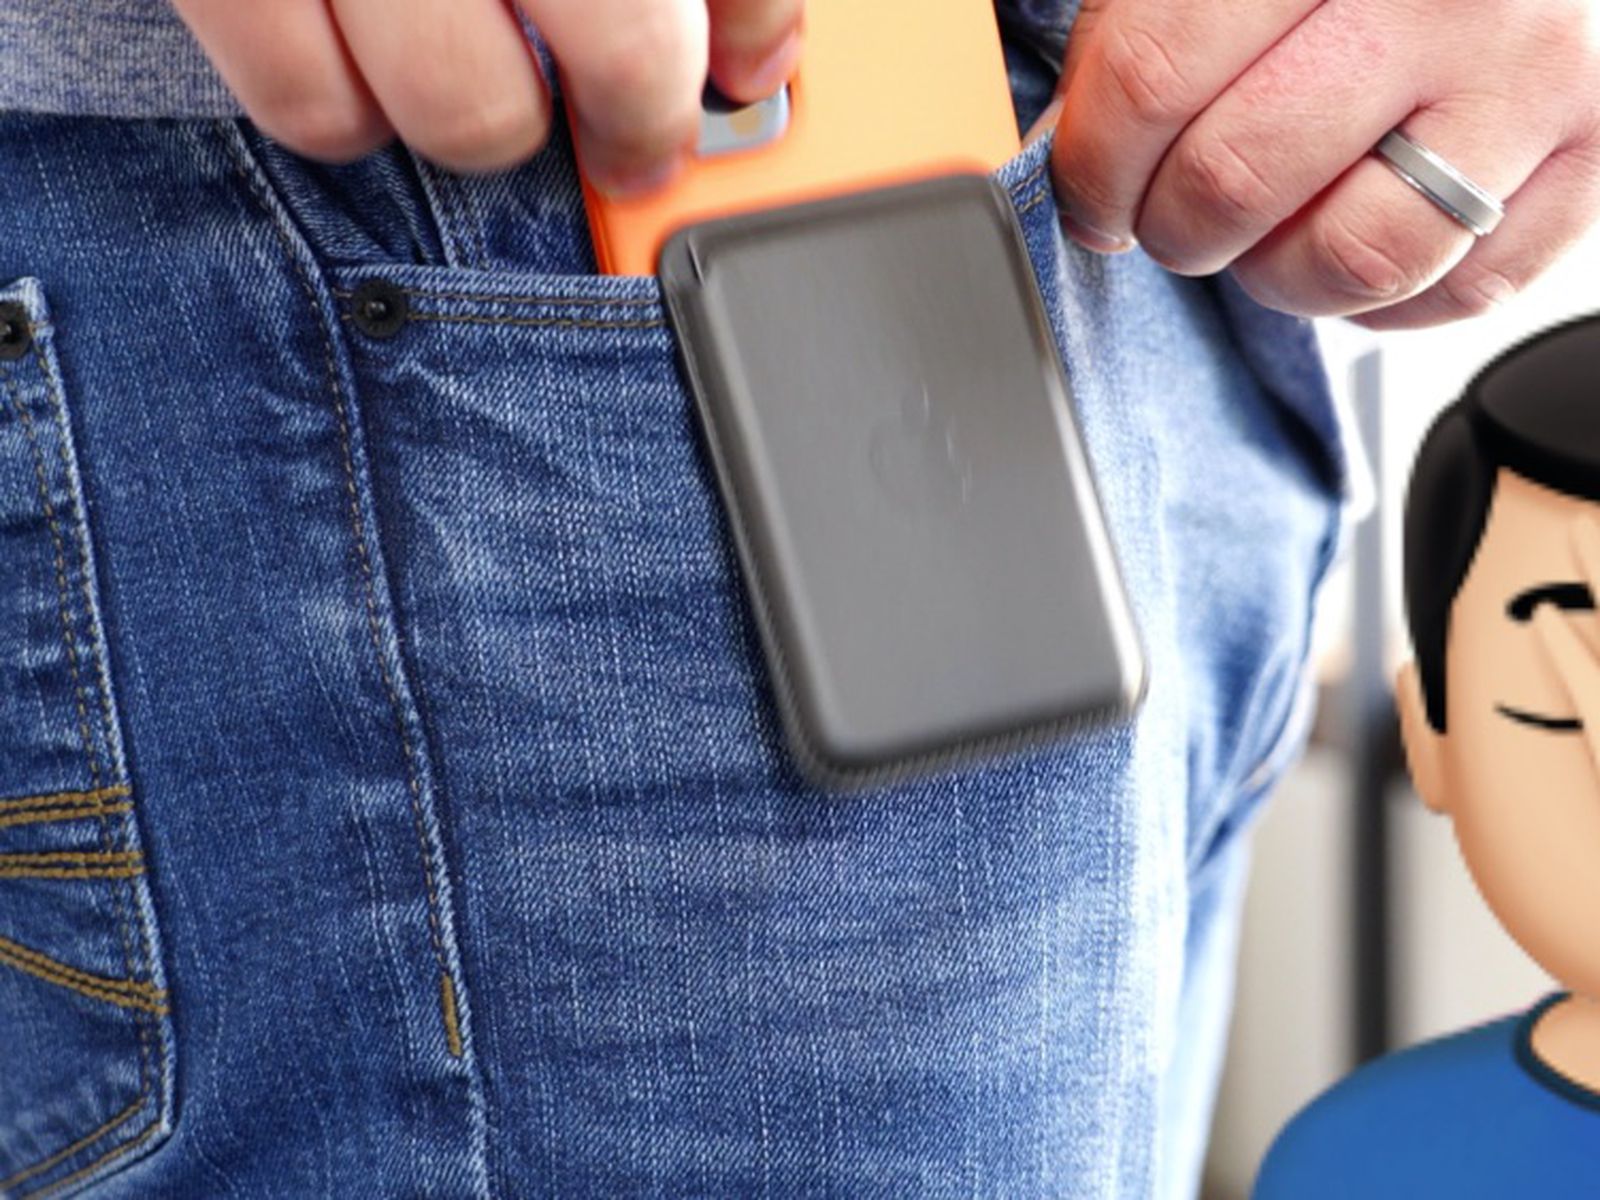 Hands-On With Apple's iPhone 12 MagSafe Wallet Attachment - MacRumors